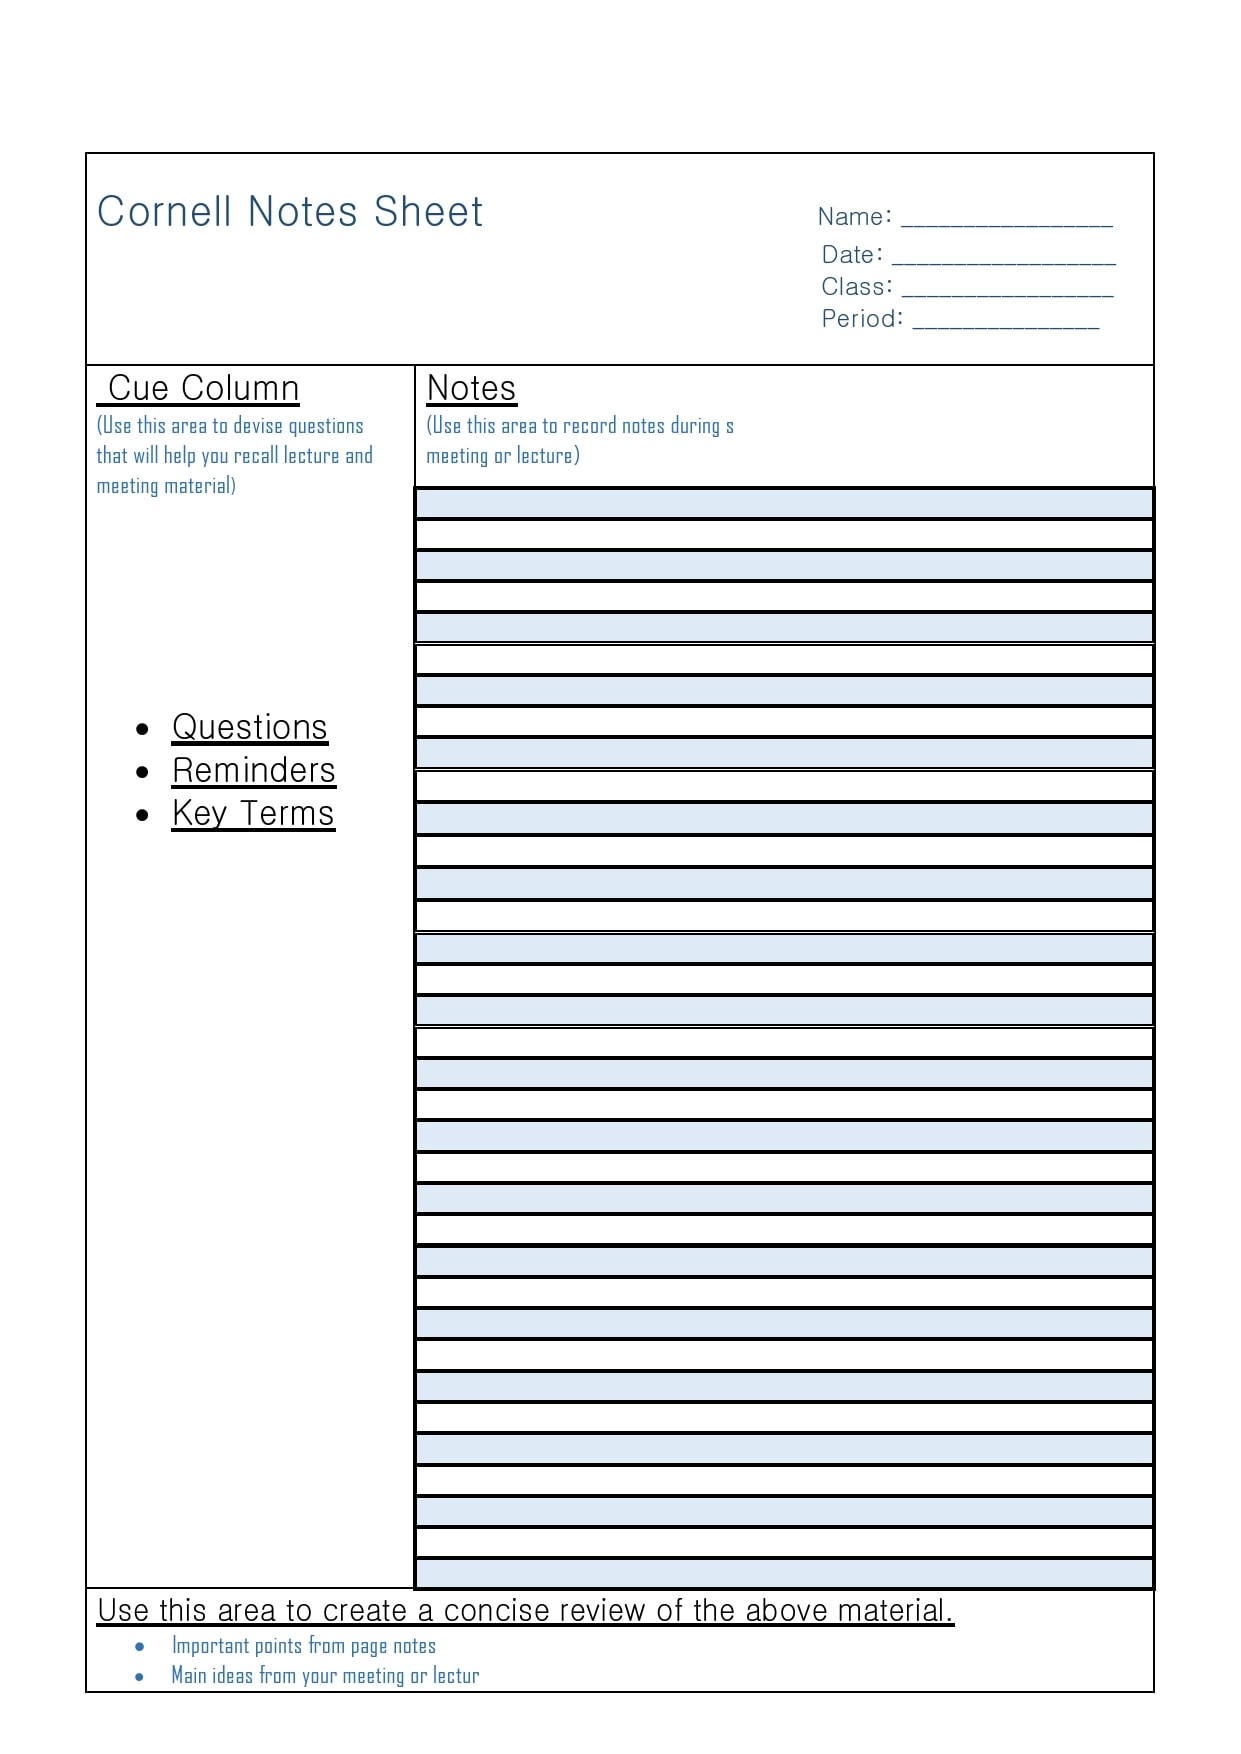 20 Printable Cornell Notes Templates [Free] - TemplateArchive With Lecture Notes Template Word